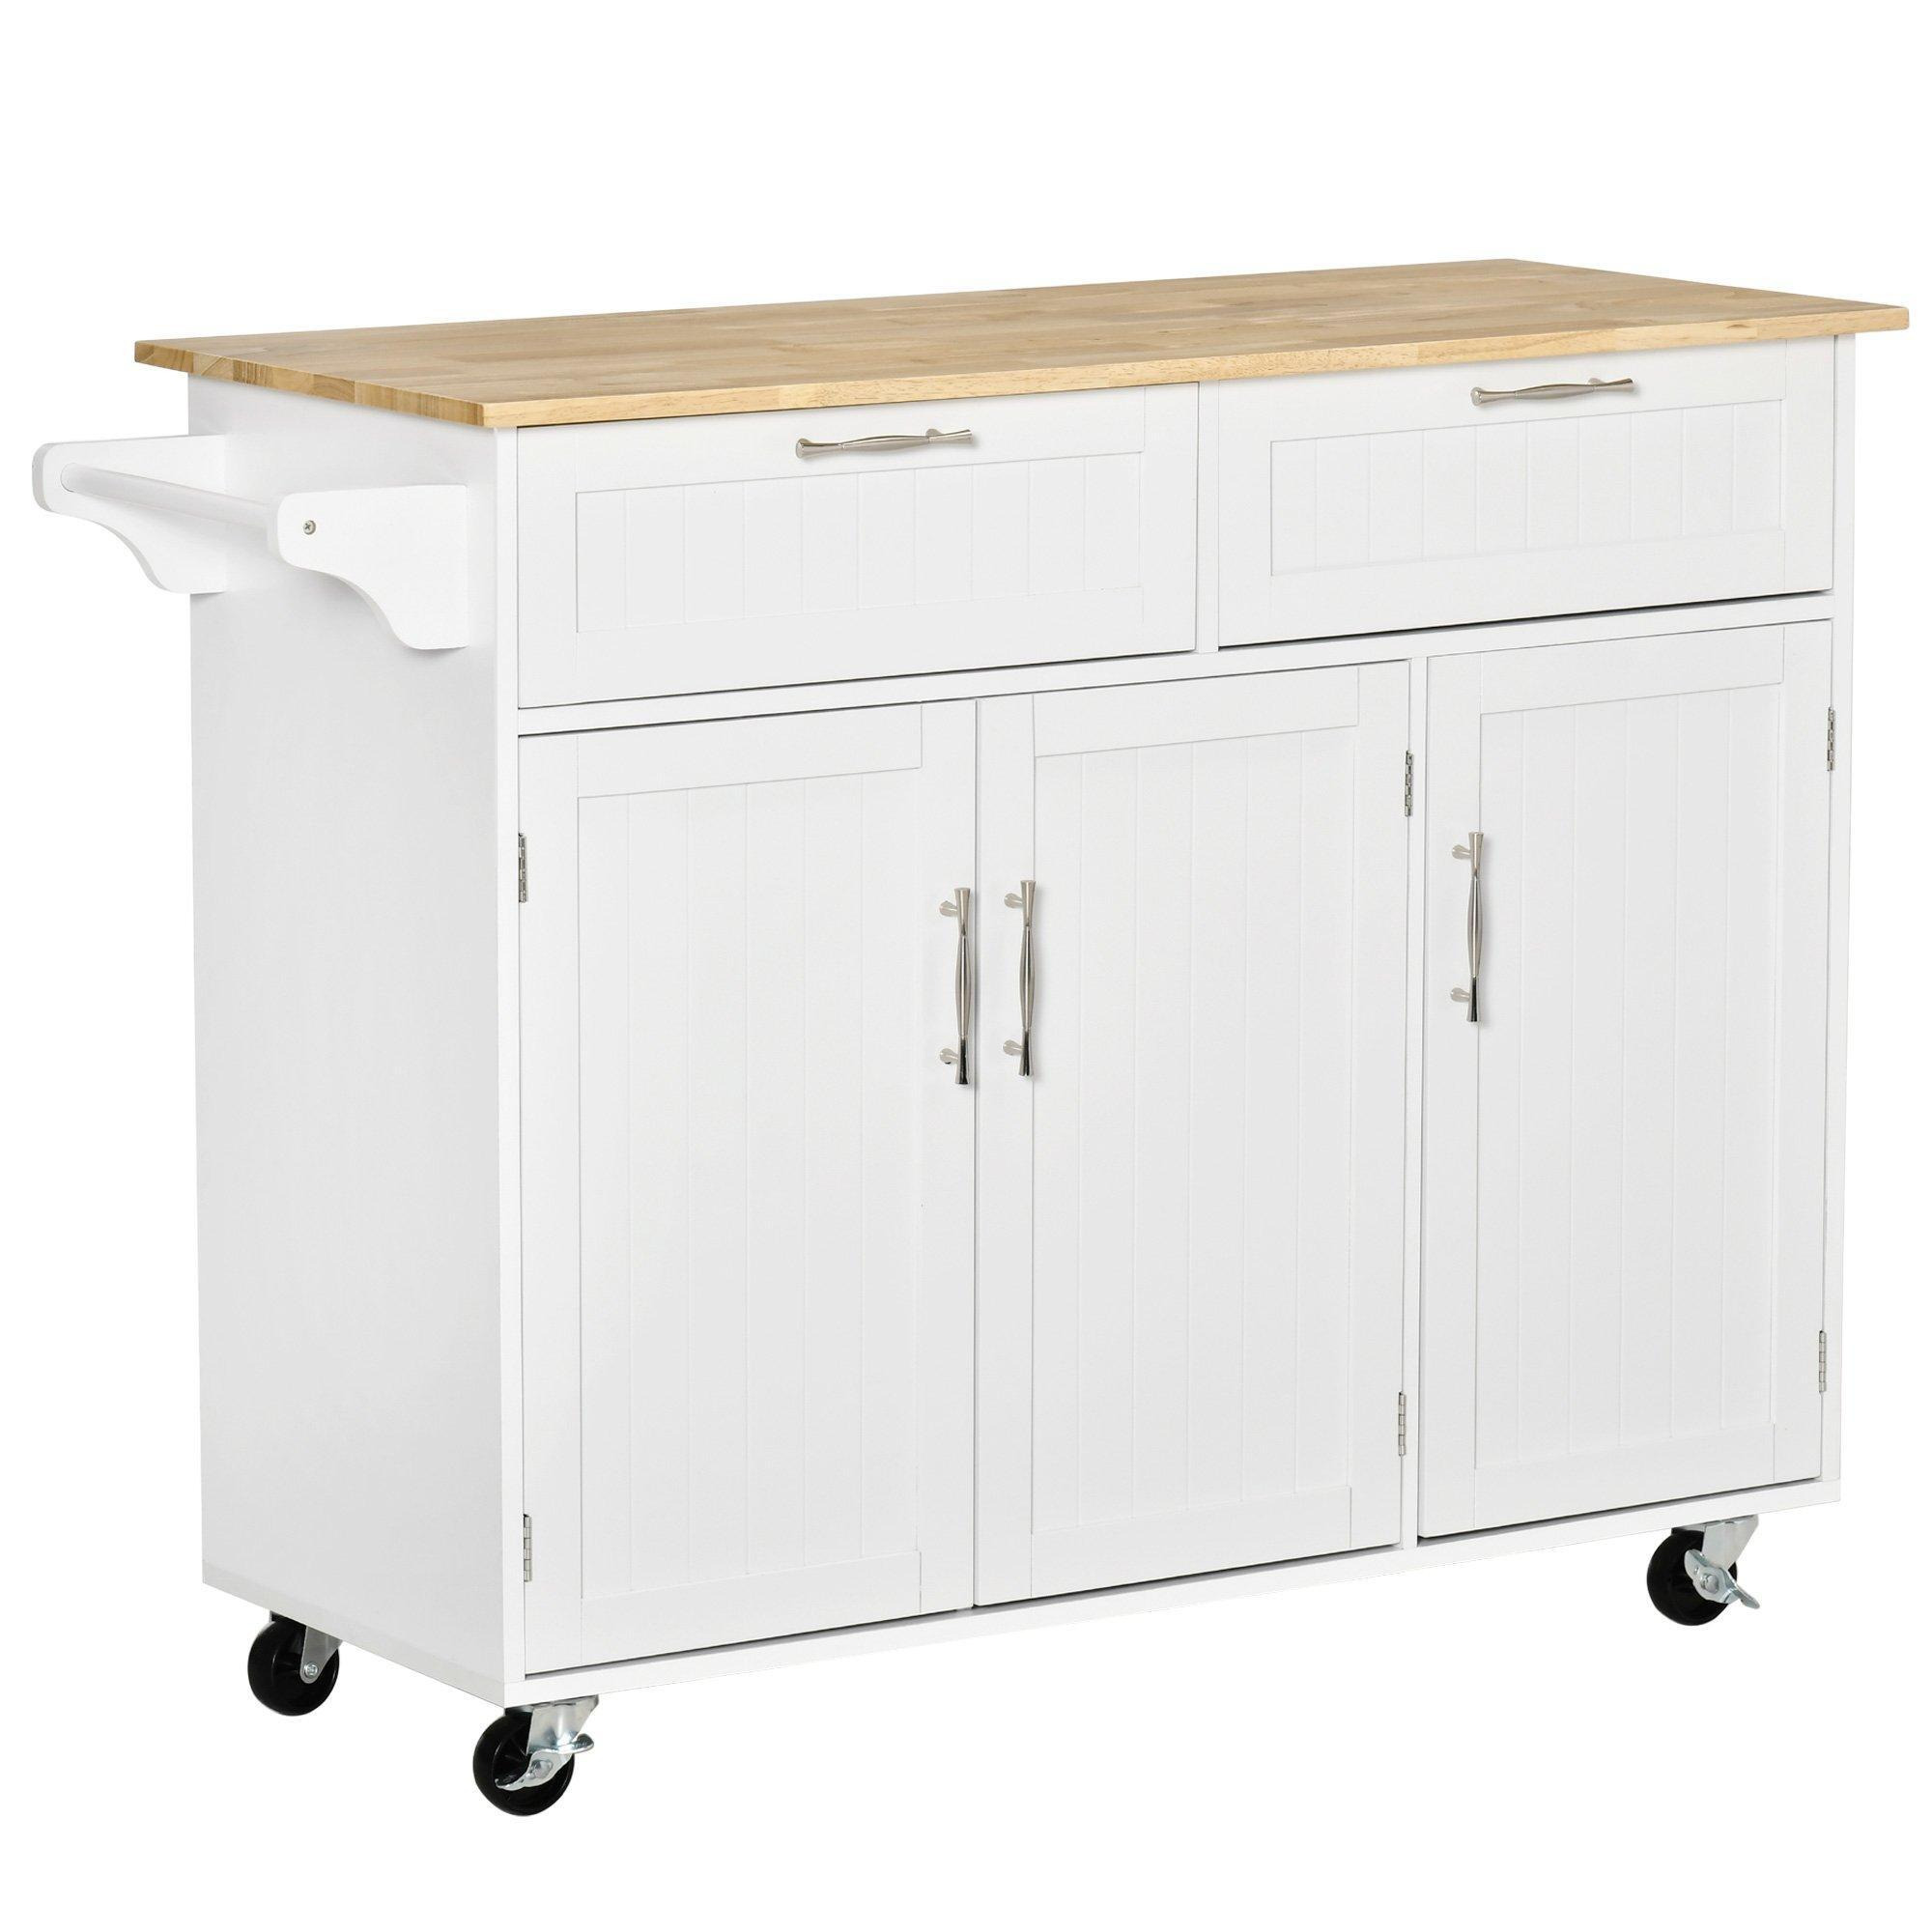 Kitchen Island Utility Cart with 2 Storage Drawers Cabinets - image 1